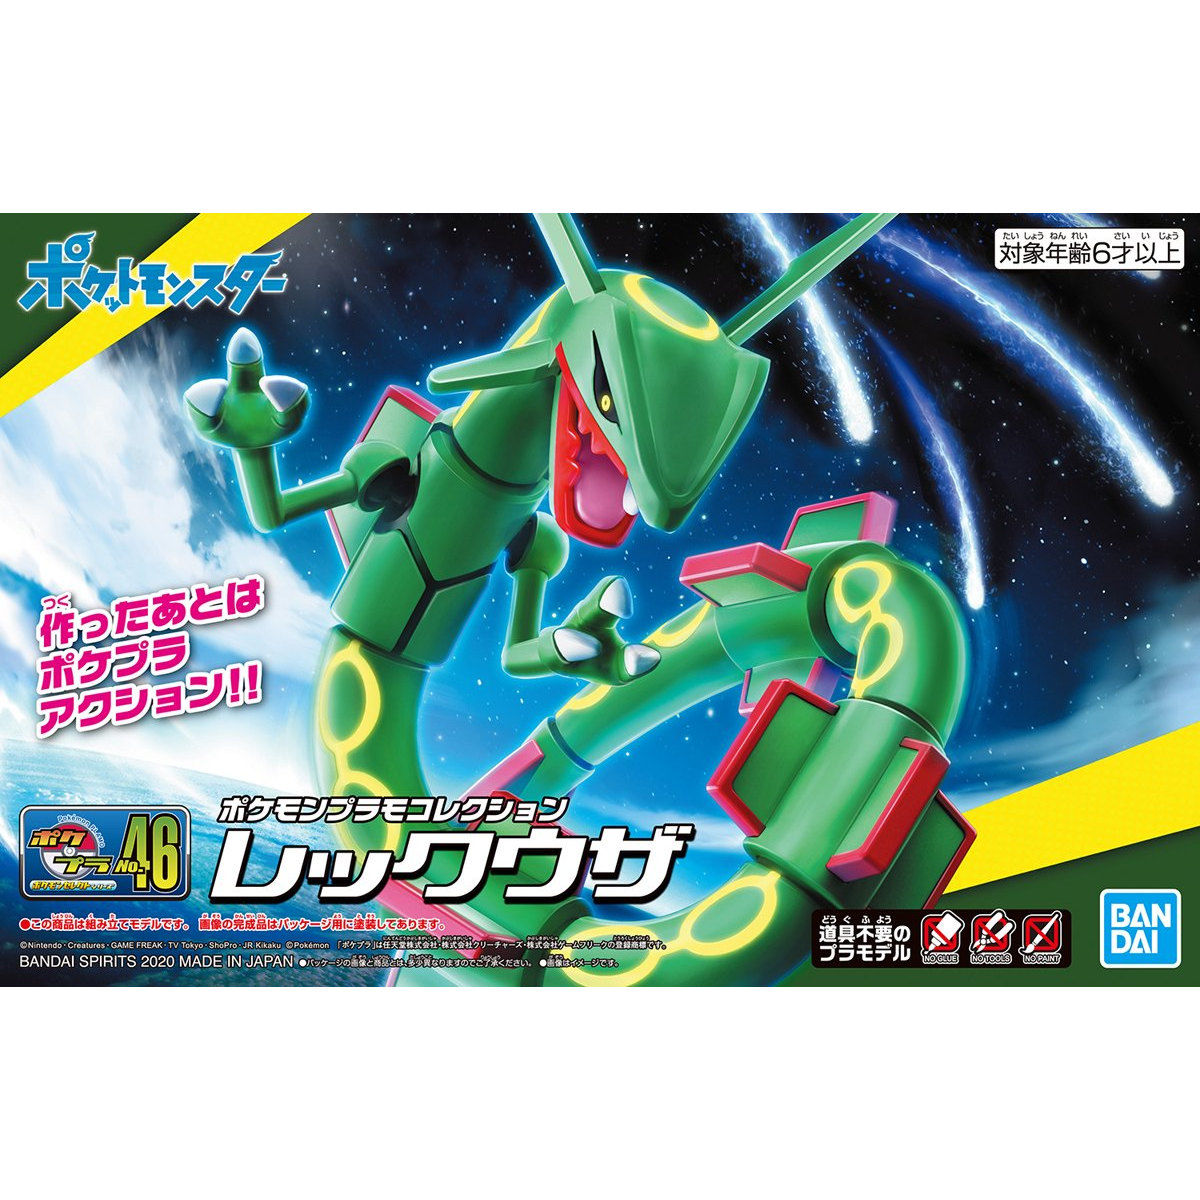 Pokémon - Rayquaza - Pokémon Model Kit Collection No.46 (Bandai), Legendary Pokémon Rayquaza model kit with movable body segments, over 200mm in length, cloud-themed display stand, Nippon Figures